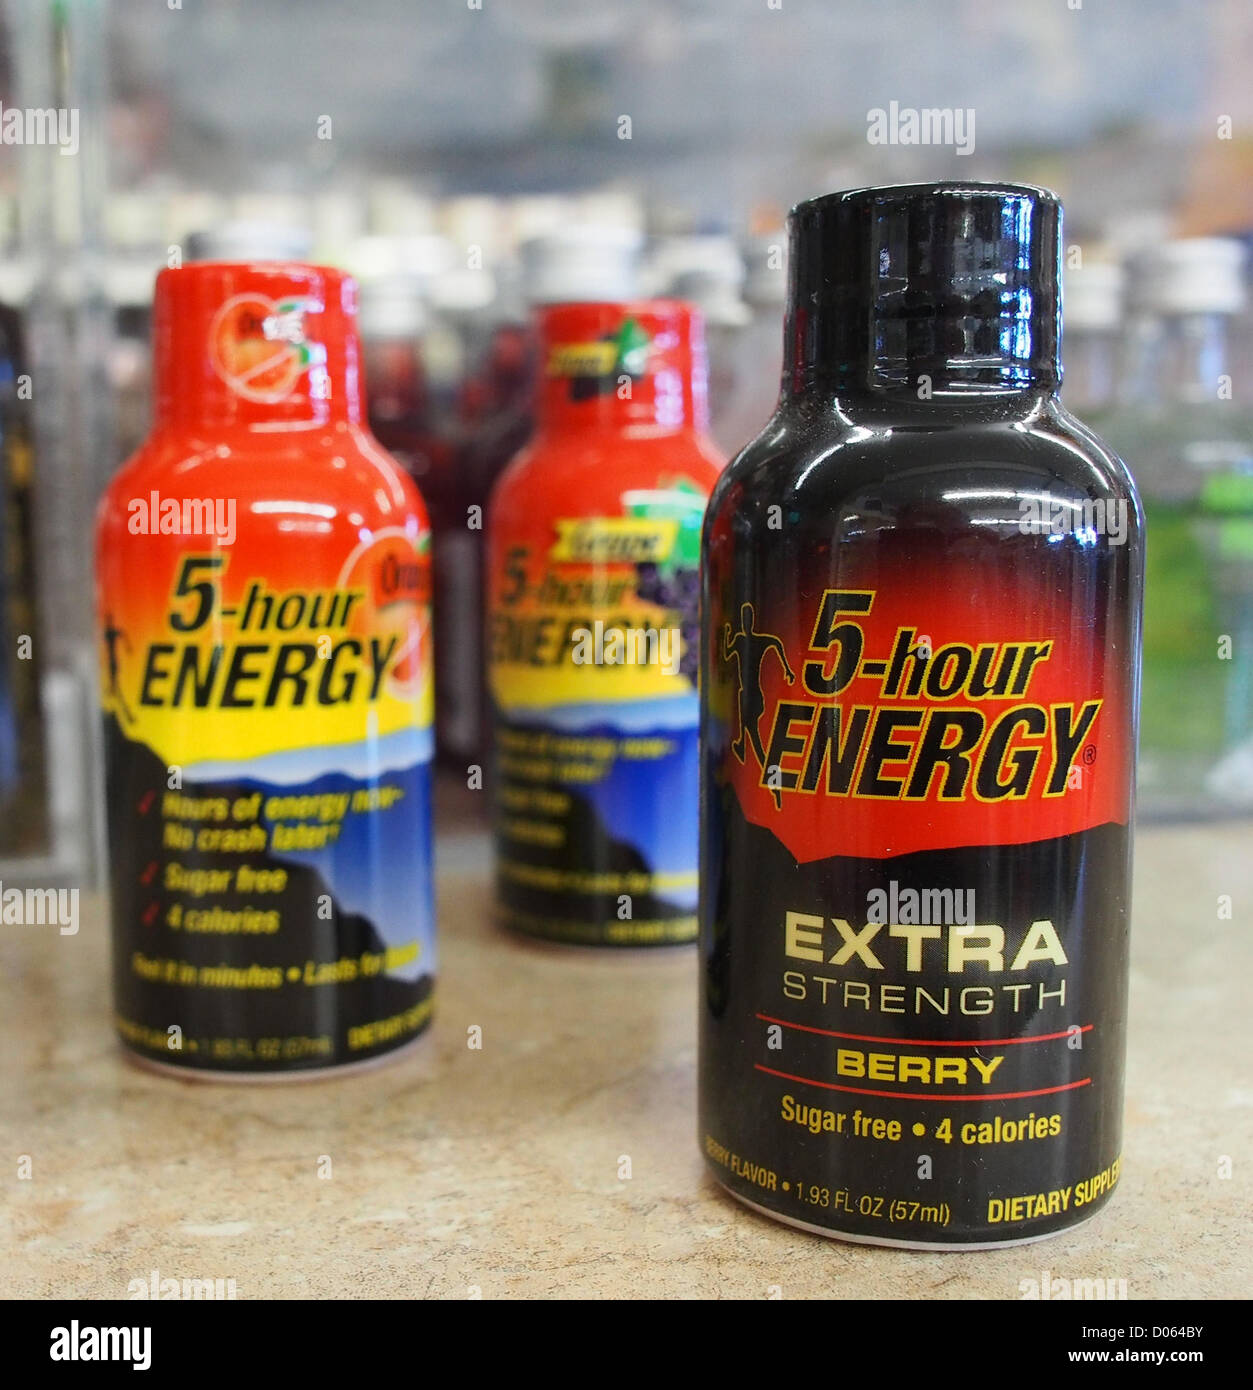 Jan. 1, 2012 - Orange County, California, USA - 5-Hour Energy drinks come in several flavors including orange, cherry and grape as well as a berry flavor in an extra strength mix.  News outlets, including ABC's Nightline, have reported that 13 deaths along with over 30 hospitalizations over the last 4 years in the United States can be attributed to the use of highly caffeinated energy drinks like 5-Hour Energy and Monster.  The drinks carry no age restriction and can be purchased by children.  In the case of 5-Hour Energy,  the drink has the caffeine equivalent of two regular cups of coffee in Stock Photo